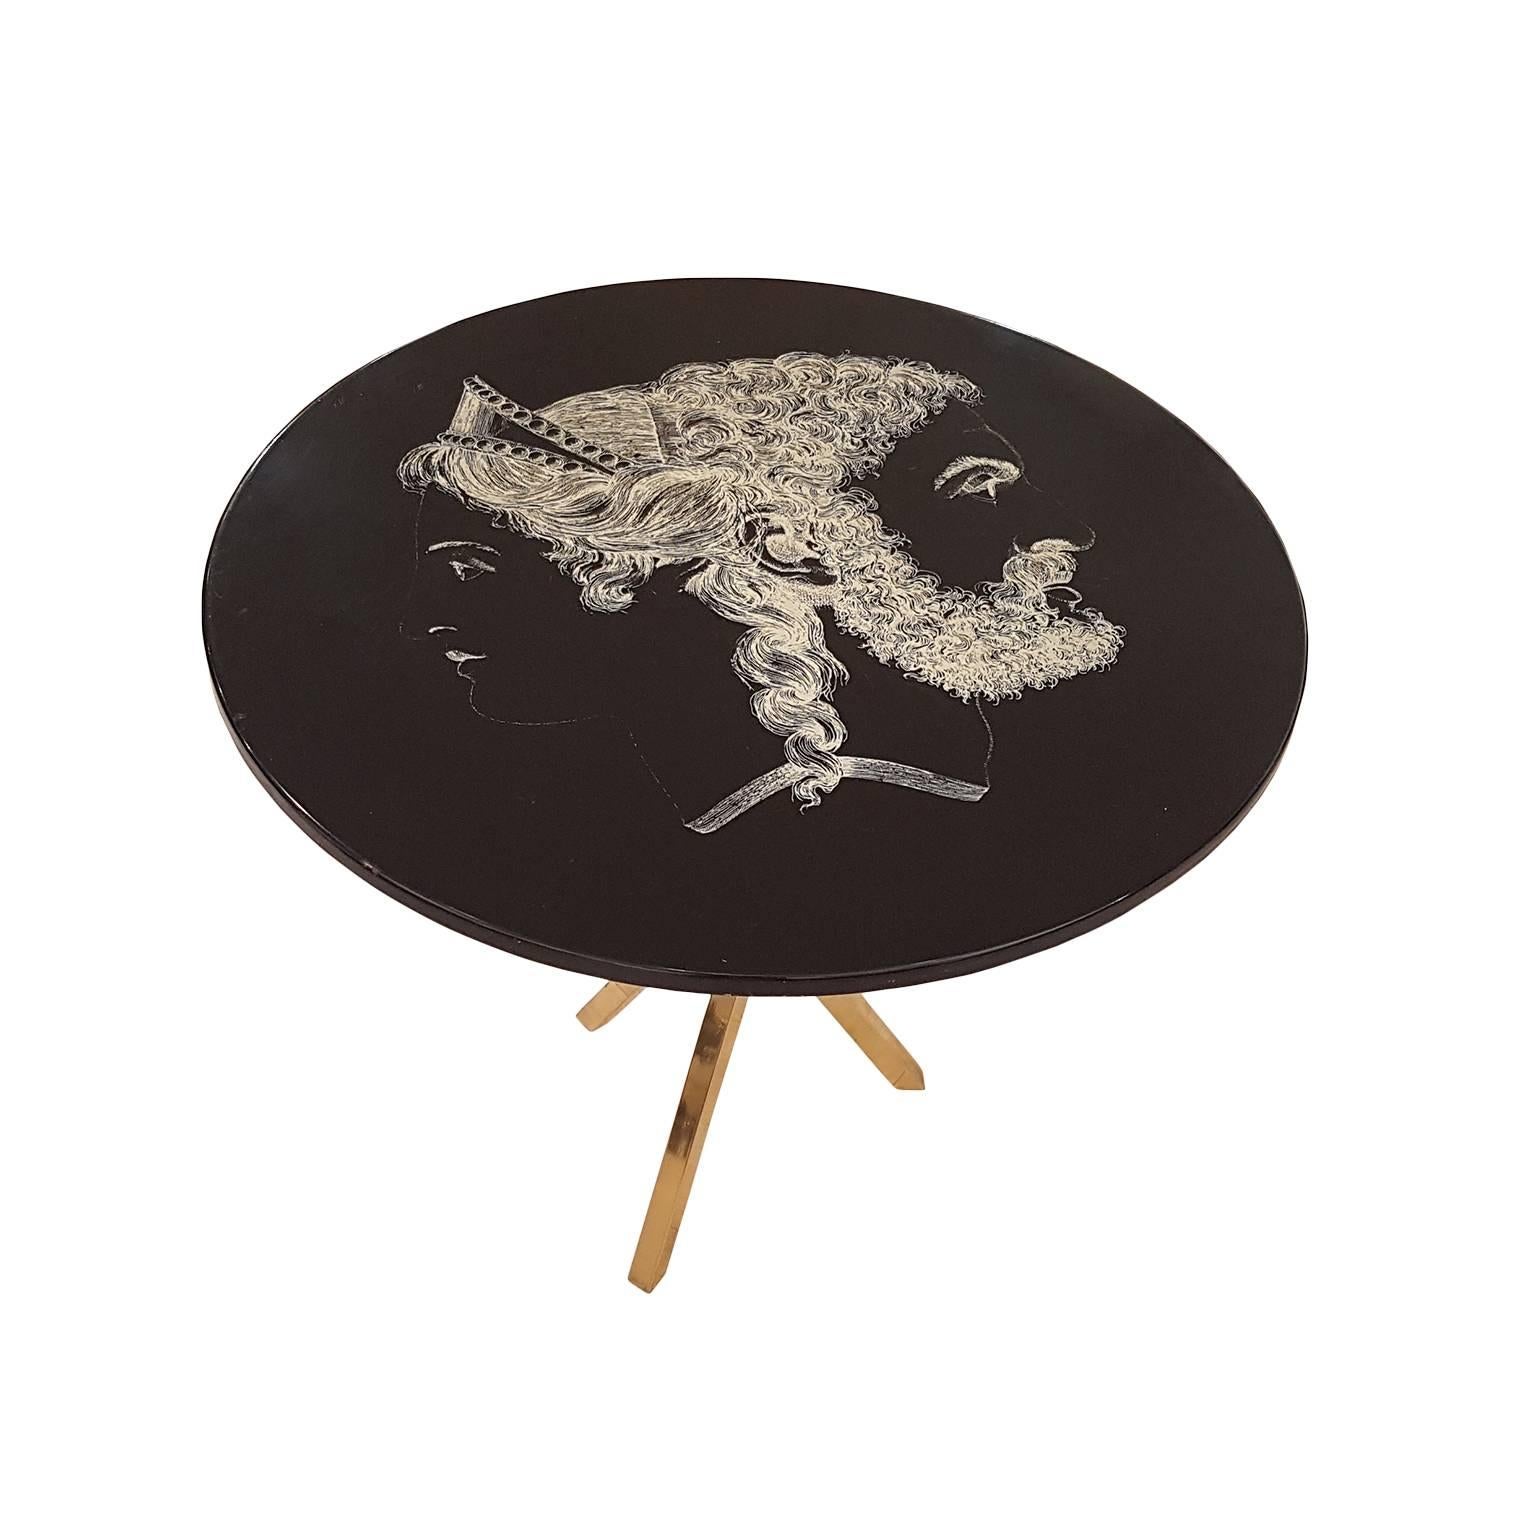 Vintage side table with lacquered wood and decorated with serigraphy, polished brass holder, and manufacturer's label under the tabletop.
Its designer, Piero Fornasetti (Milan 1913 - 1988) is considered among the most original and creative talents